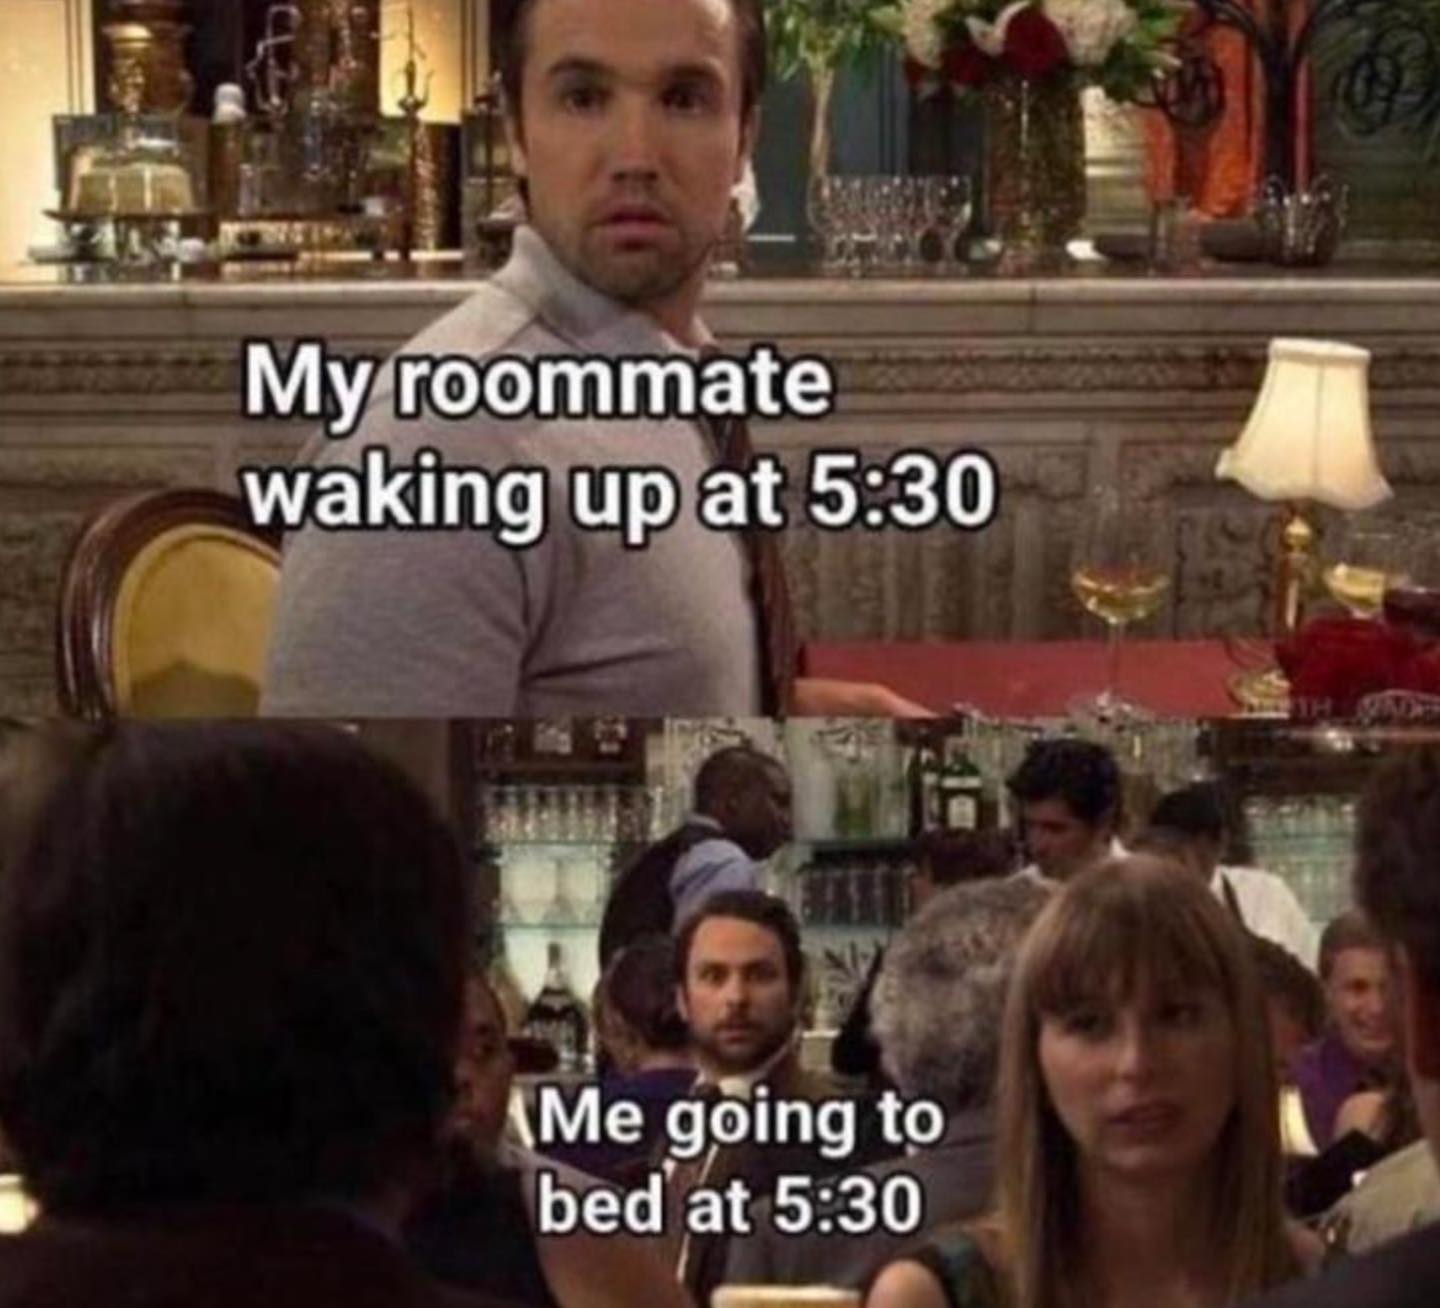 my roommate waking up at 530 meme - My roommate waking up at Me going to bed at